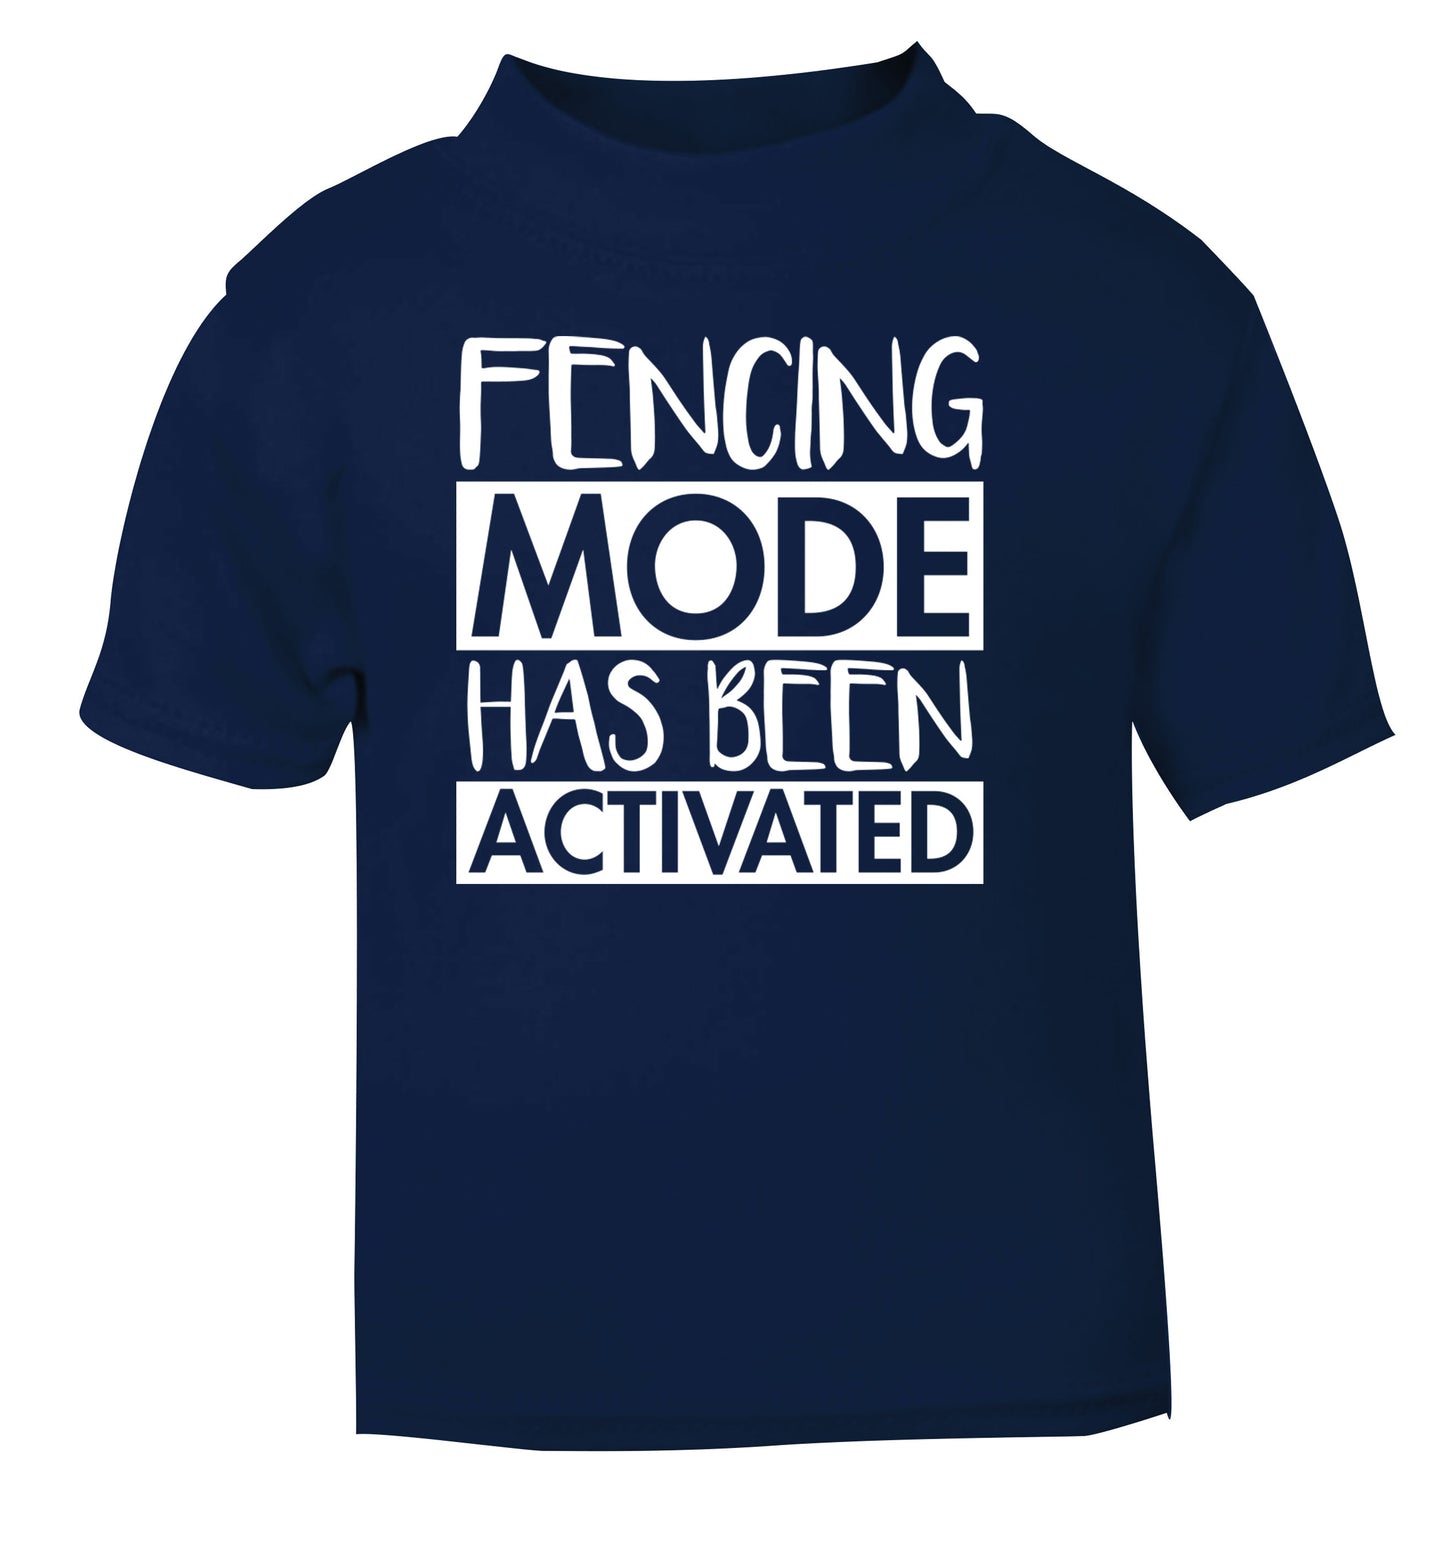 Fencing mode activated navy Baby Toddler Tshirt 2 Years